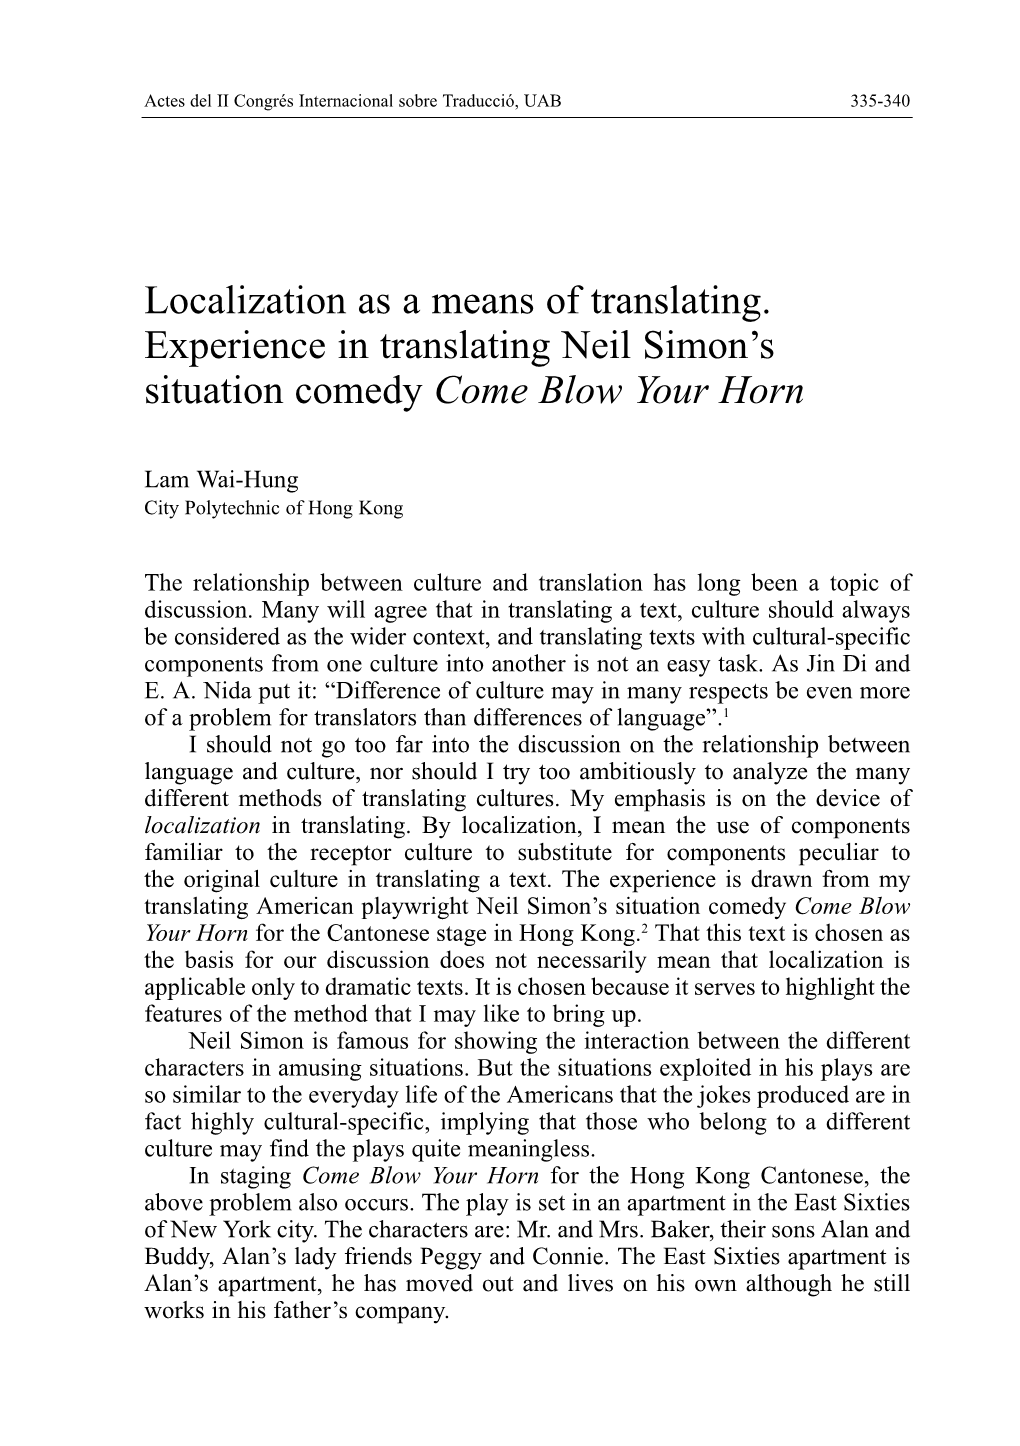 Localization As a Means of Translating. Experience in Translating Neil Simon's Situation Comedy Come Blow Your Horn